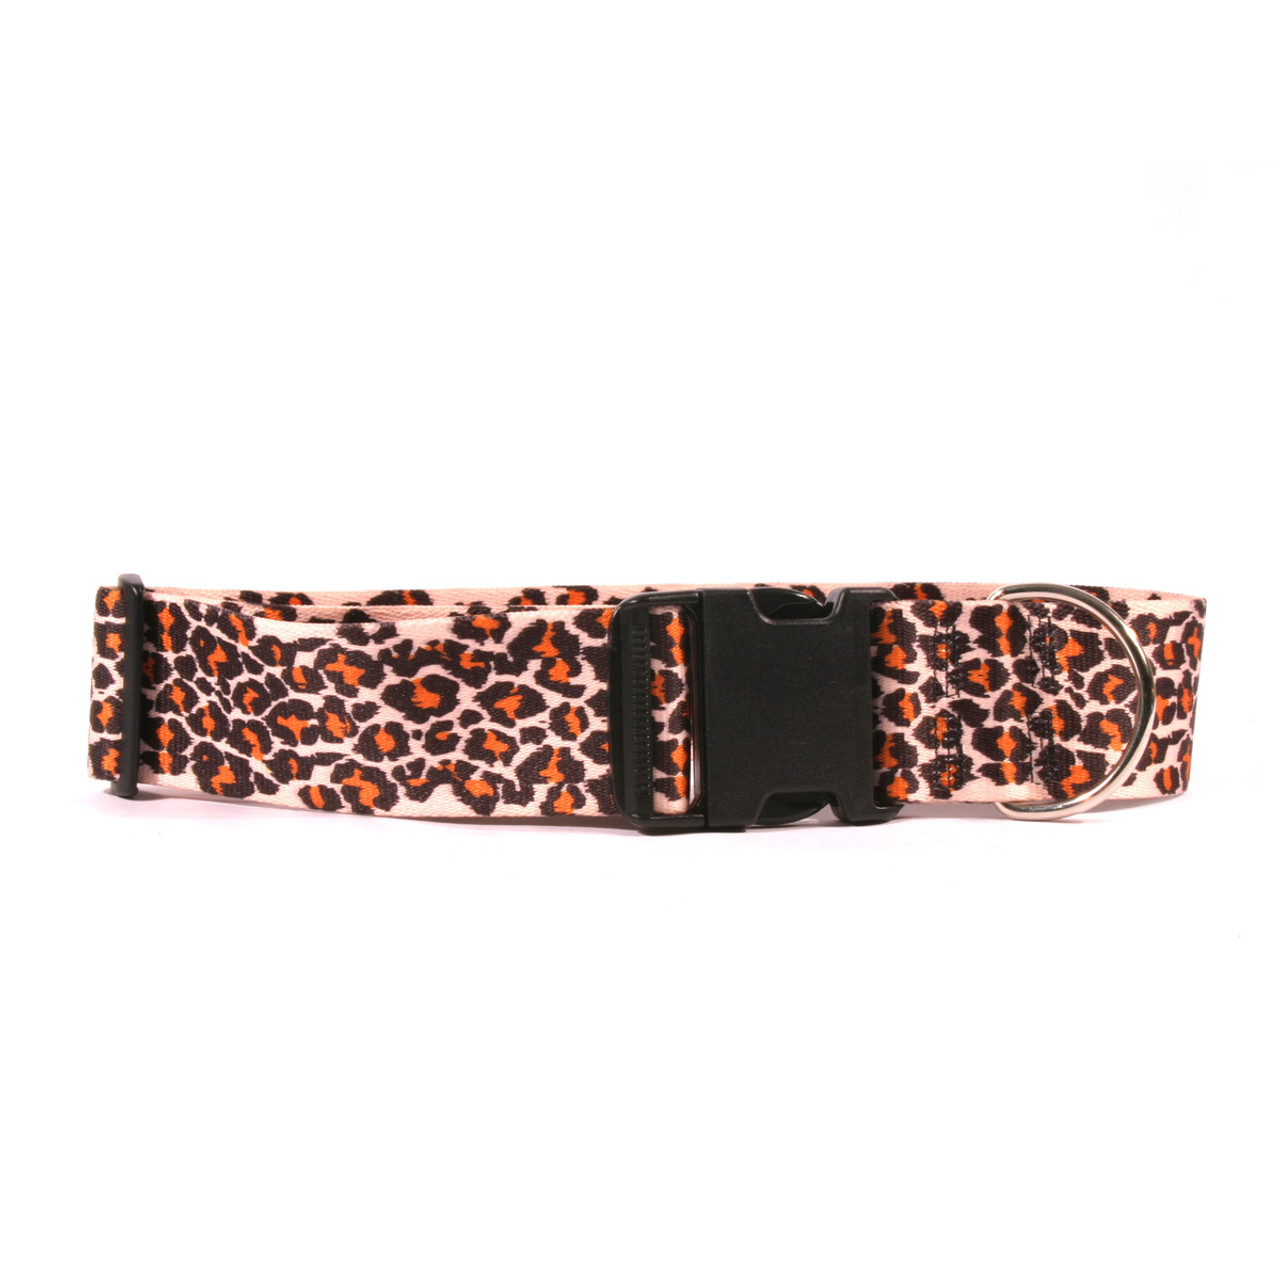 2 Inch Wide Leopard Skin Dog Collar by Yellow Dog Design. Order today ...